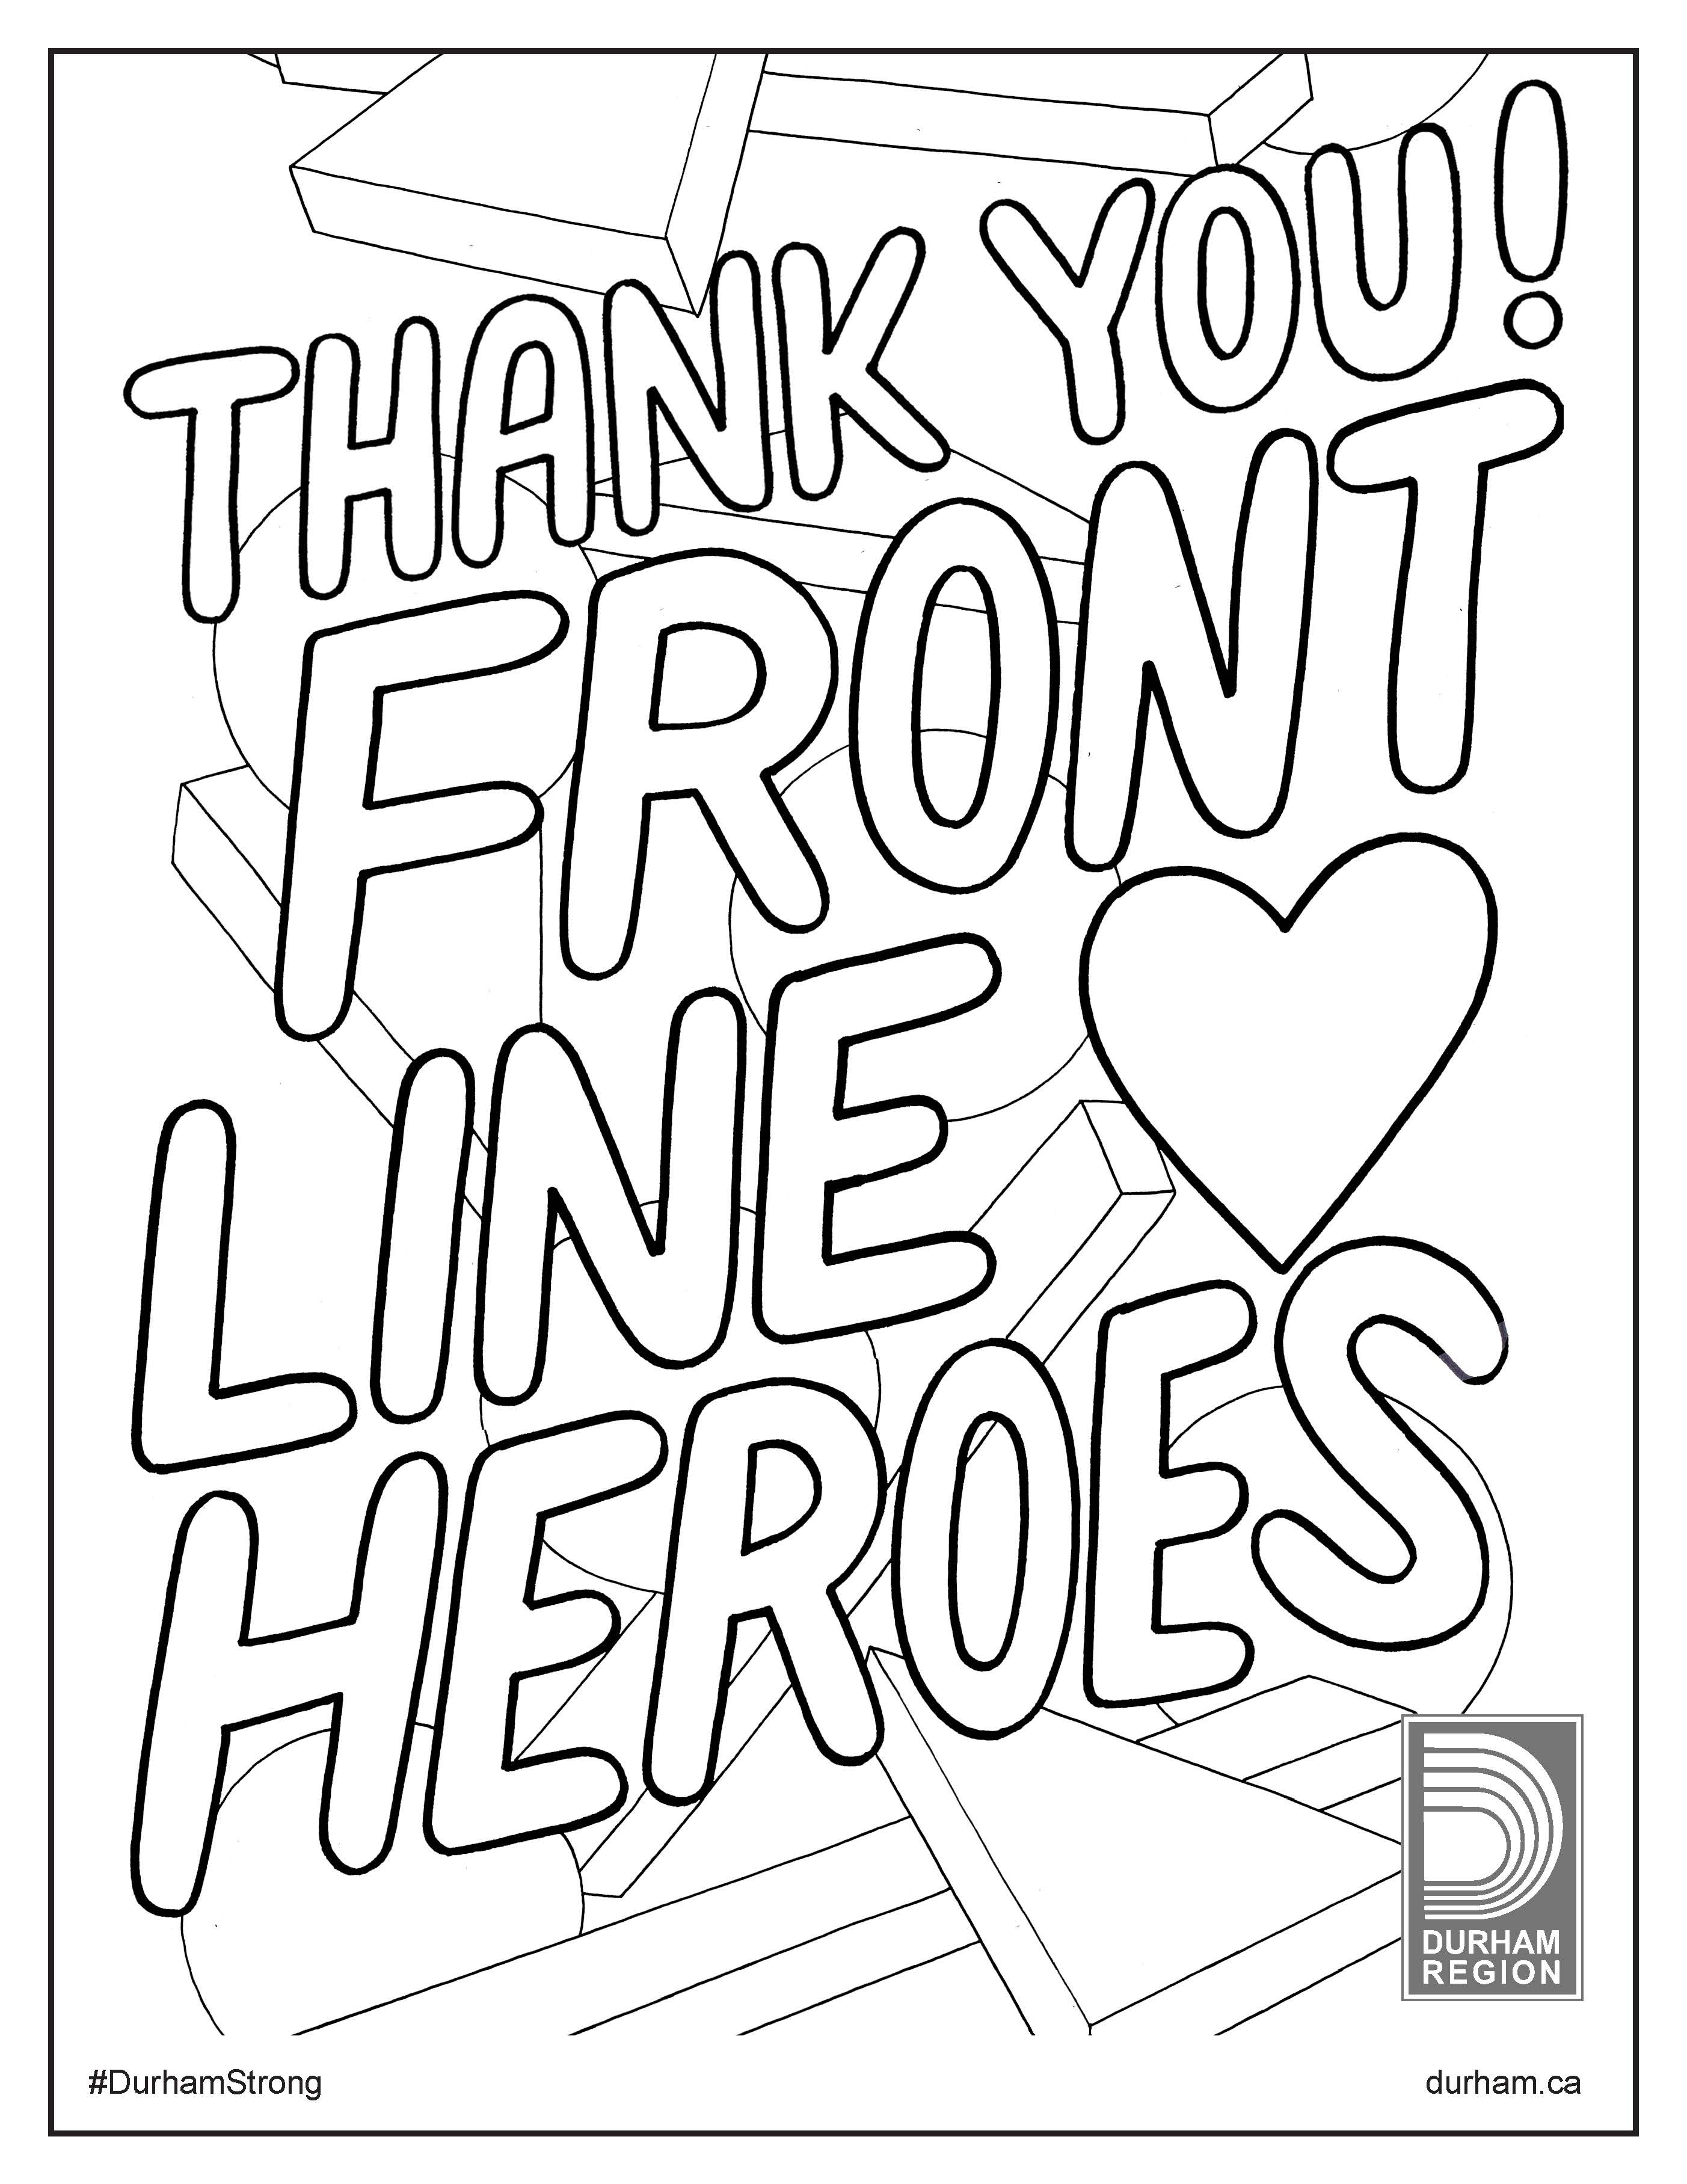 Illustration of thank you sign for front-line heroes